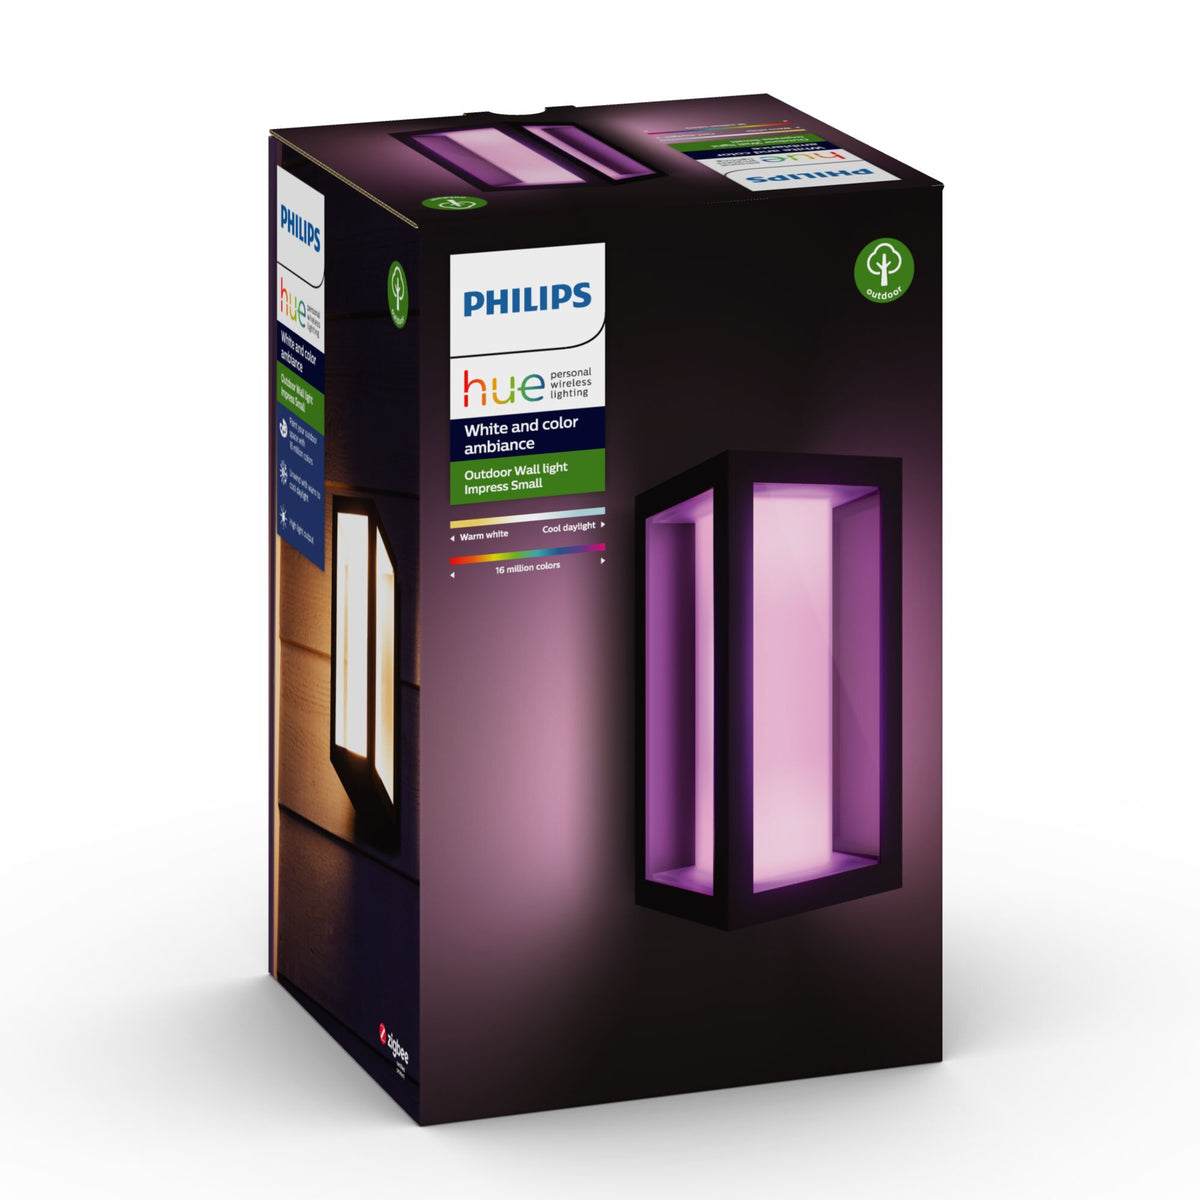 Philips Hue Impress Outdoor Wall light in Black - White and colour ambience (Pack of 1)